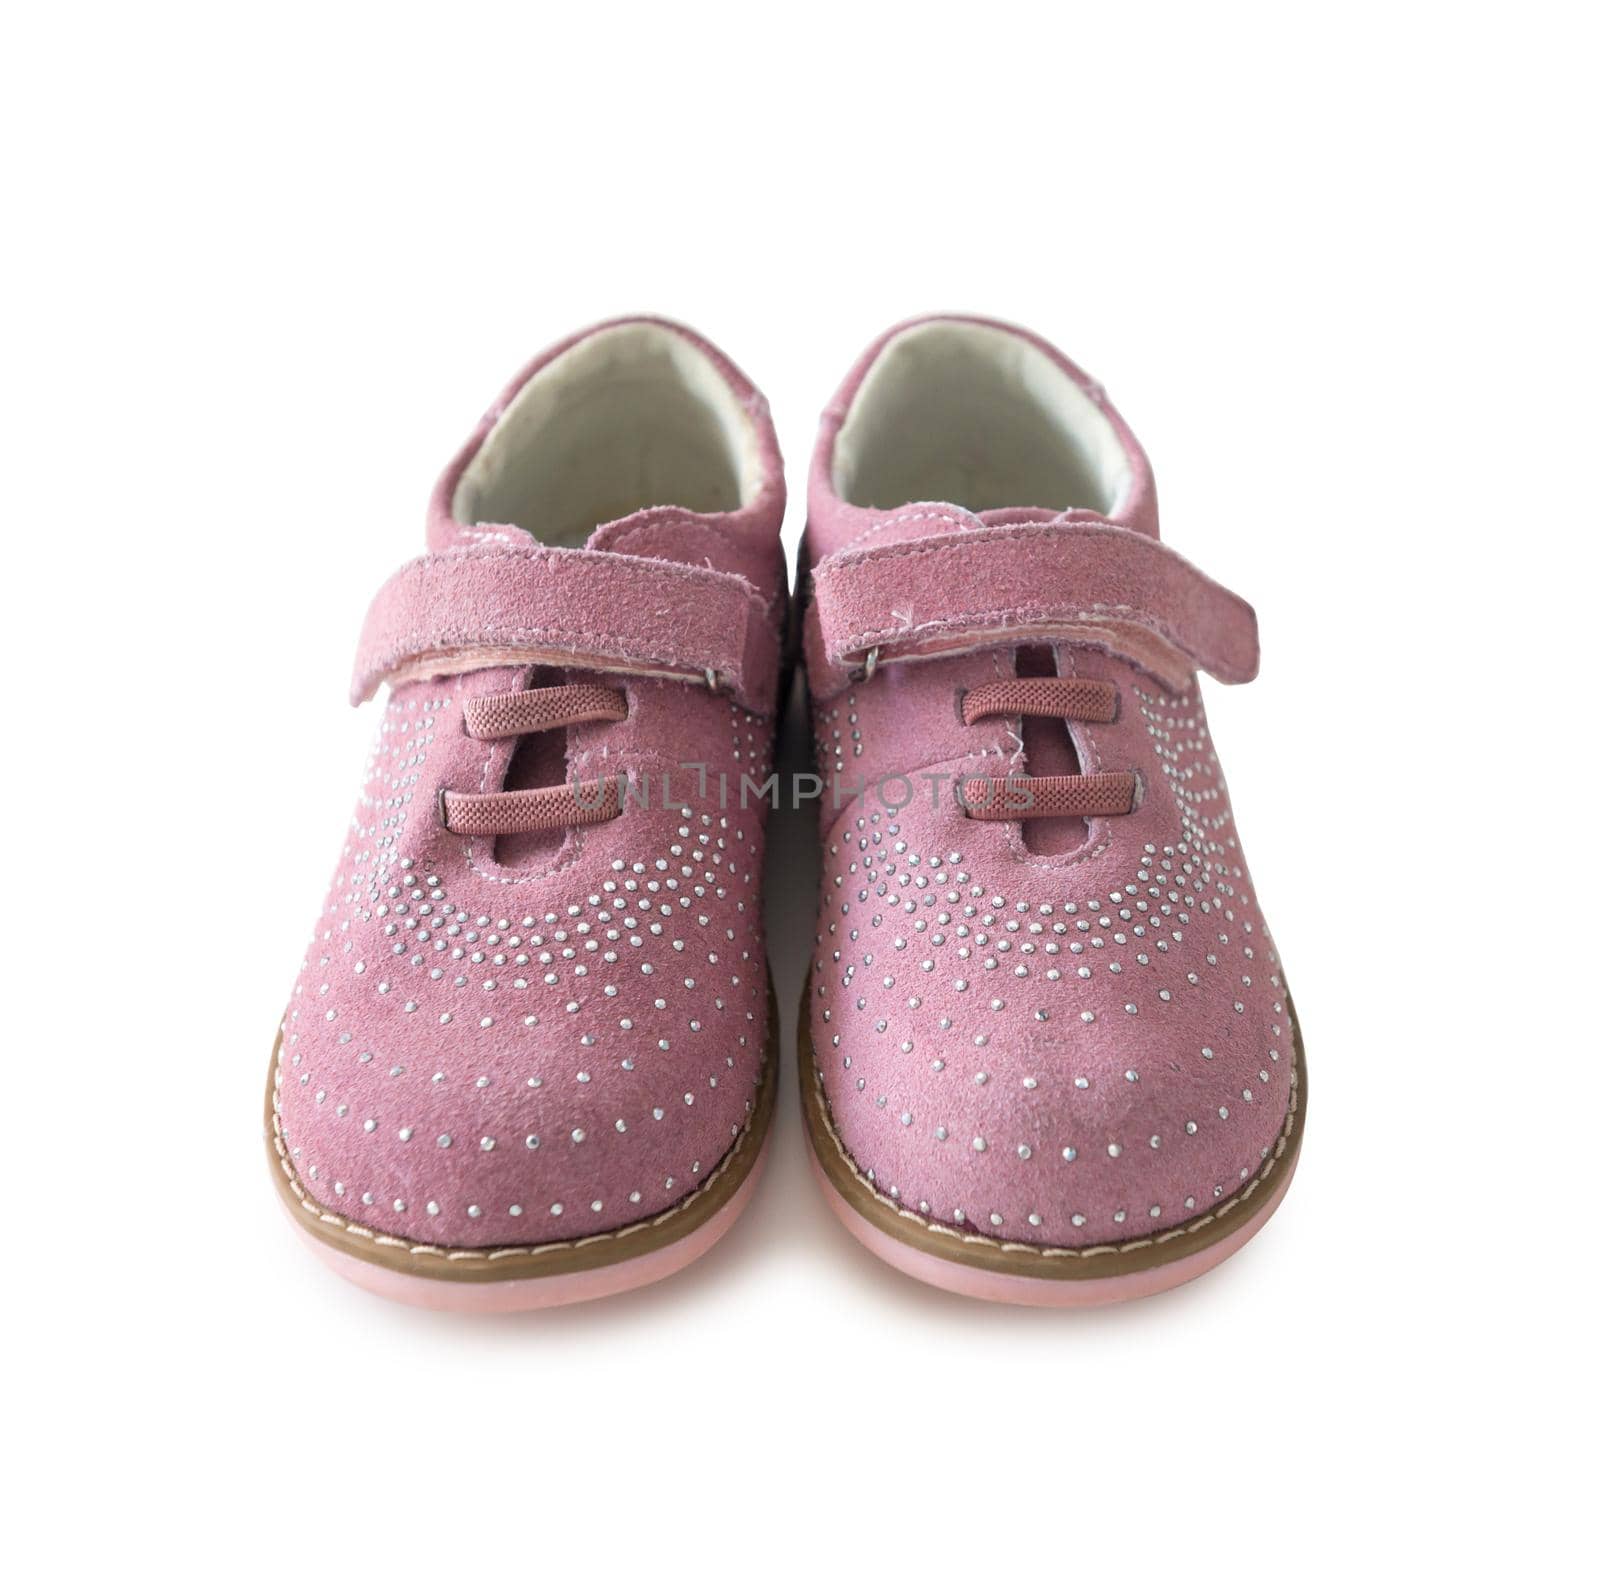 lovely pink childish shoes by tan4ikk1